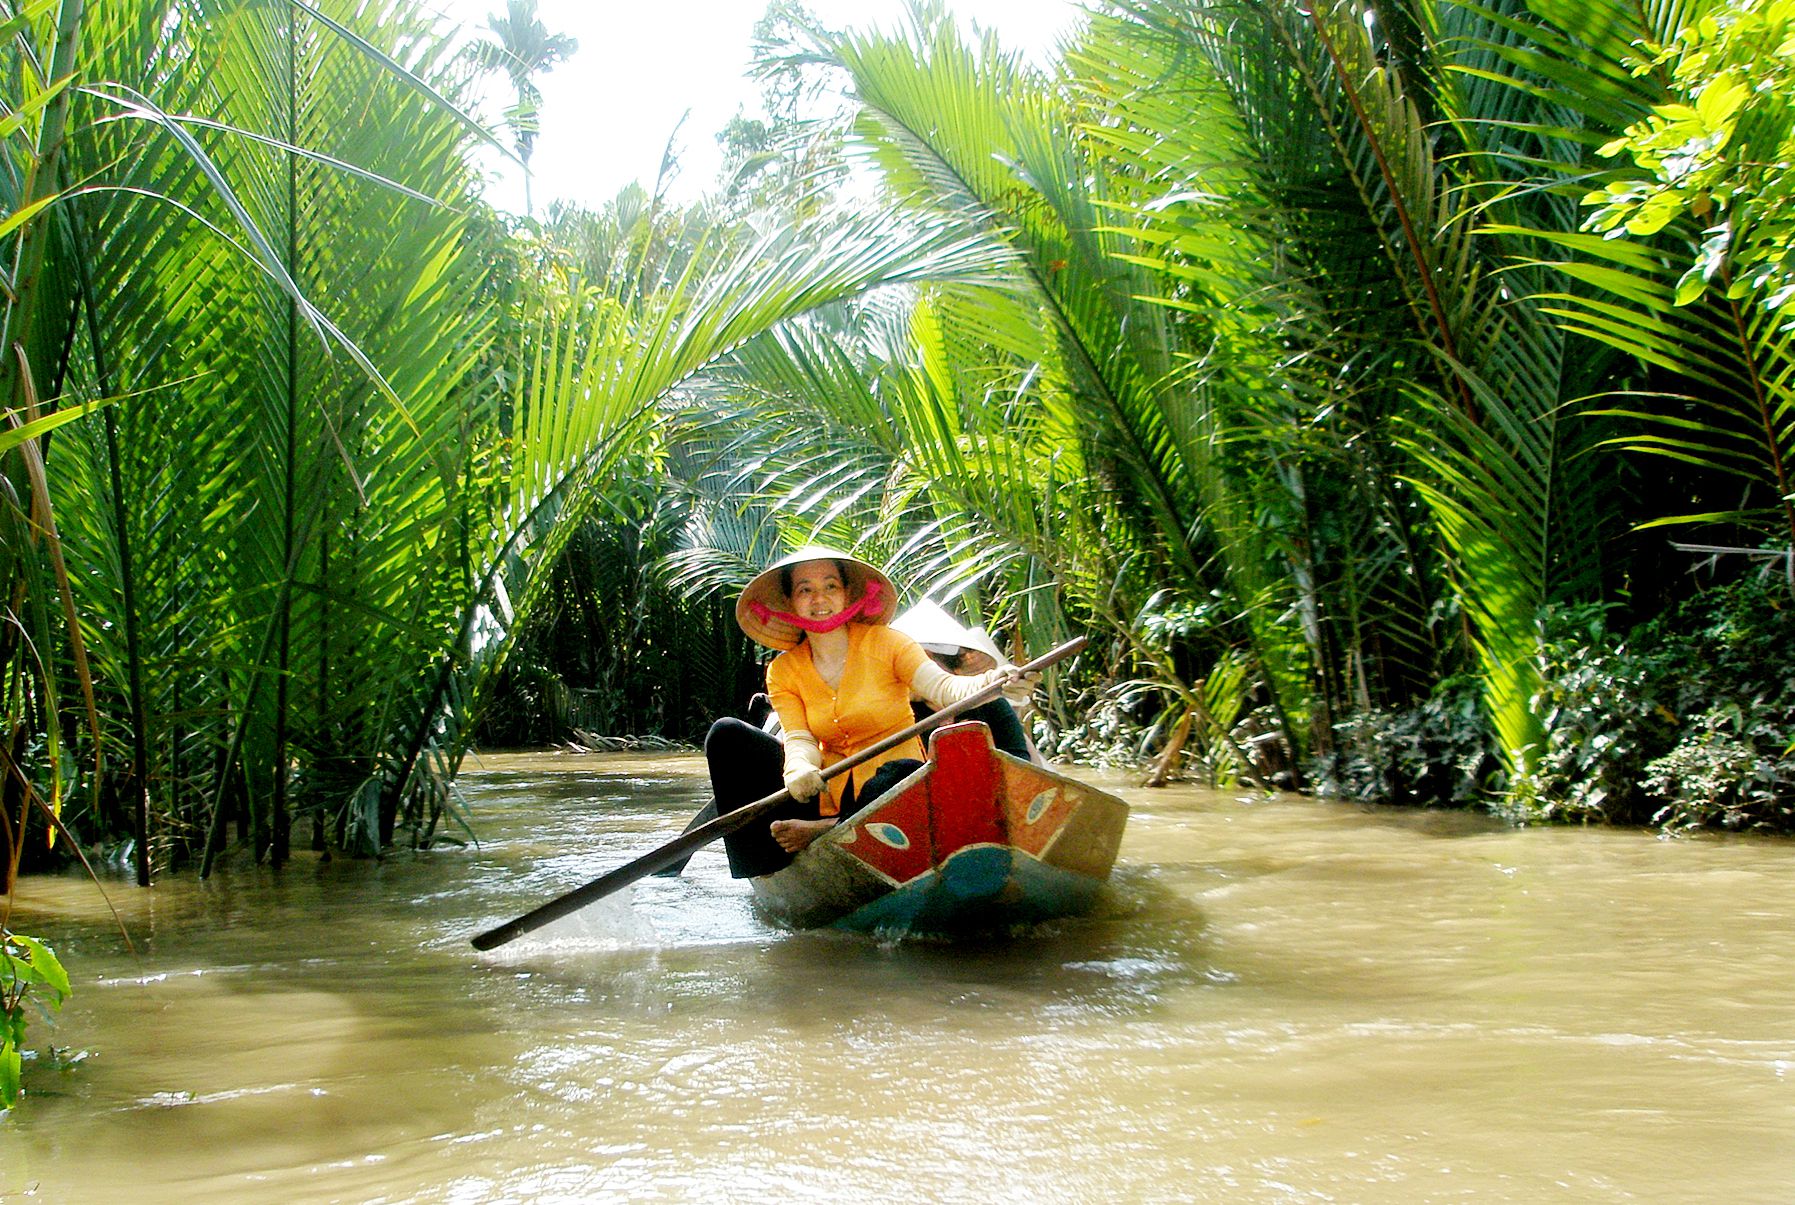 MUI NE TO CU CHI TUNNEL AND MEKONG DELTA 3 DAYS TOUR